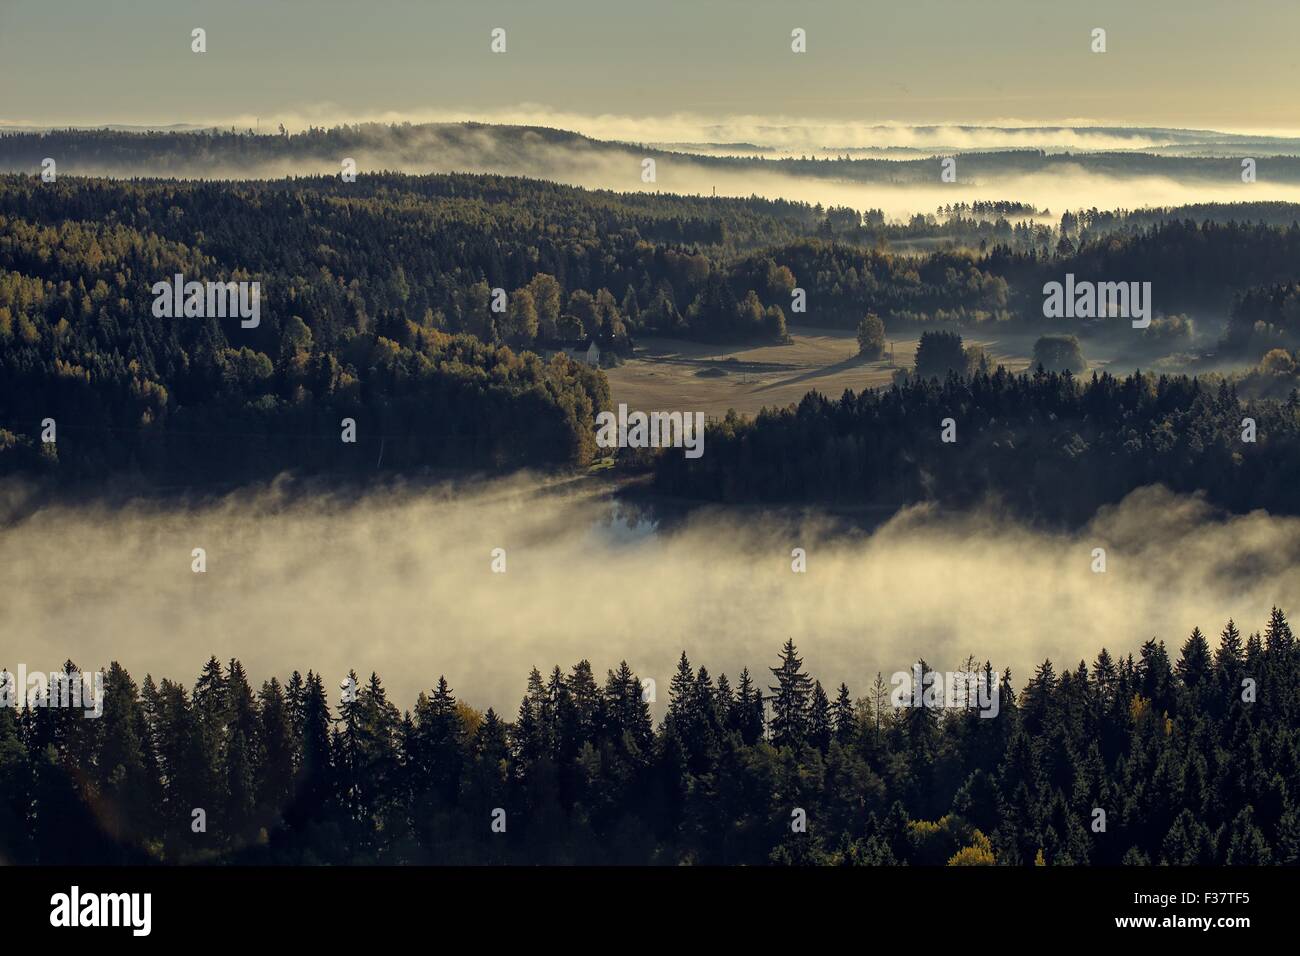 Peaceful landscape of Aulanko nature reserve park in Finland. Thick fog covering the scenery in the early morning. HDR image. Stock Photo